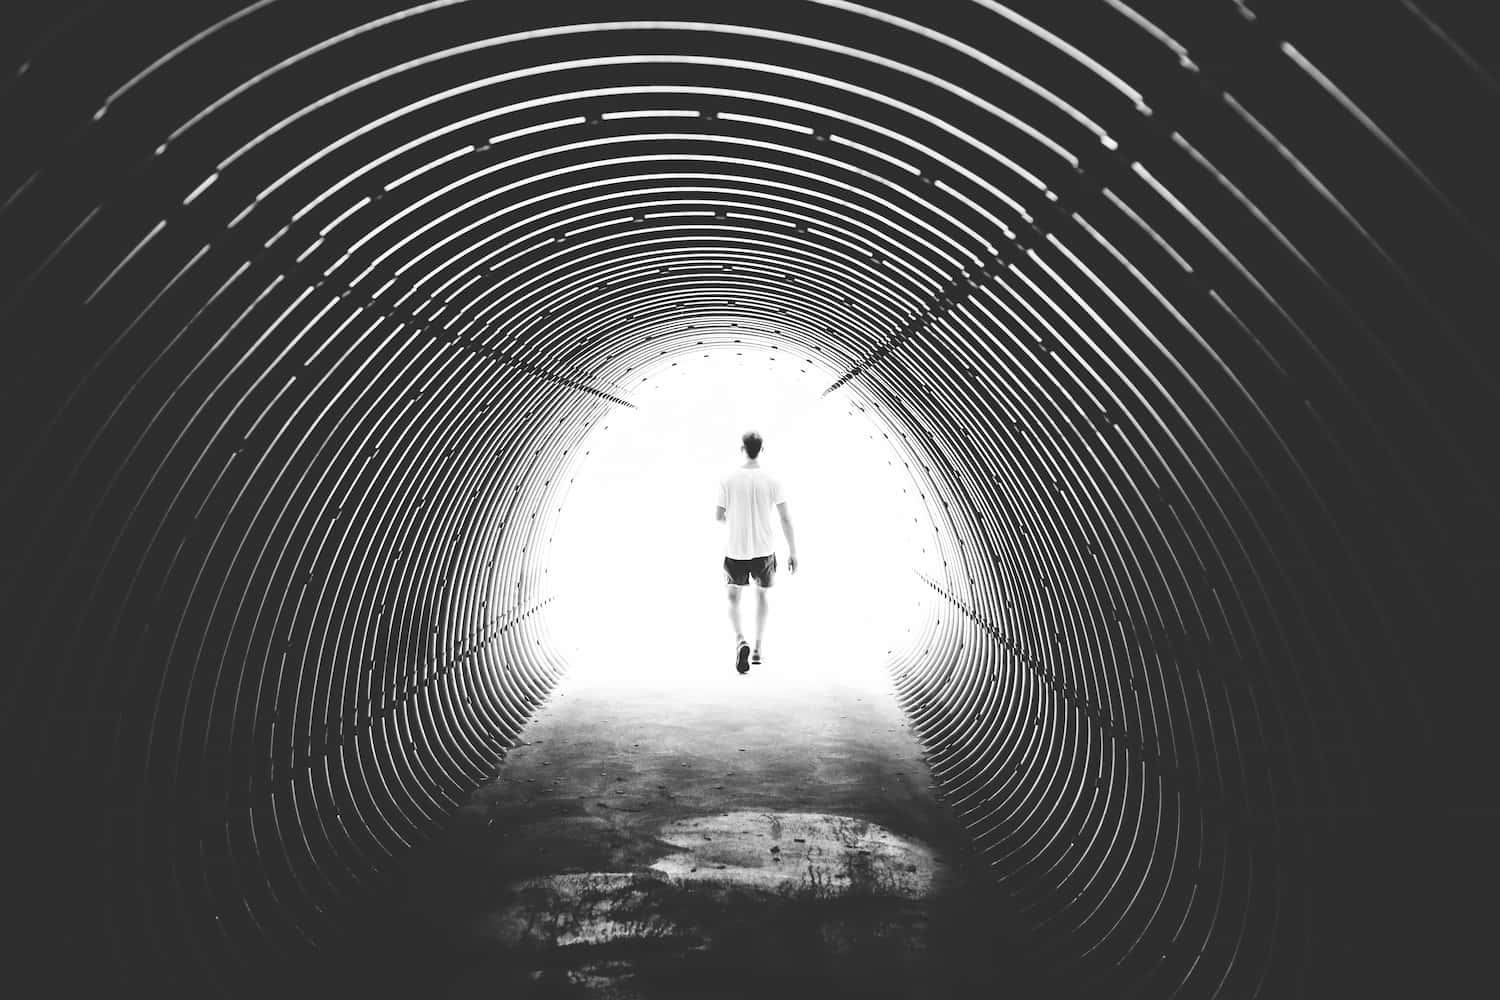 A man walks out of a dark tunnel towards a bright light